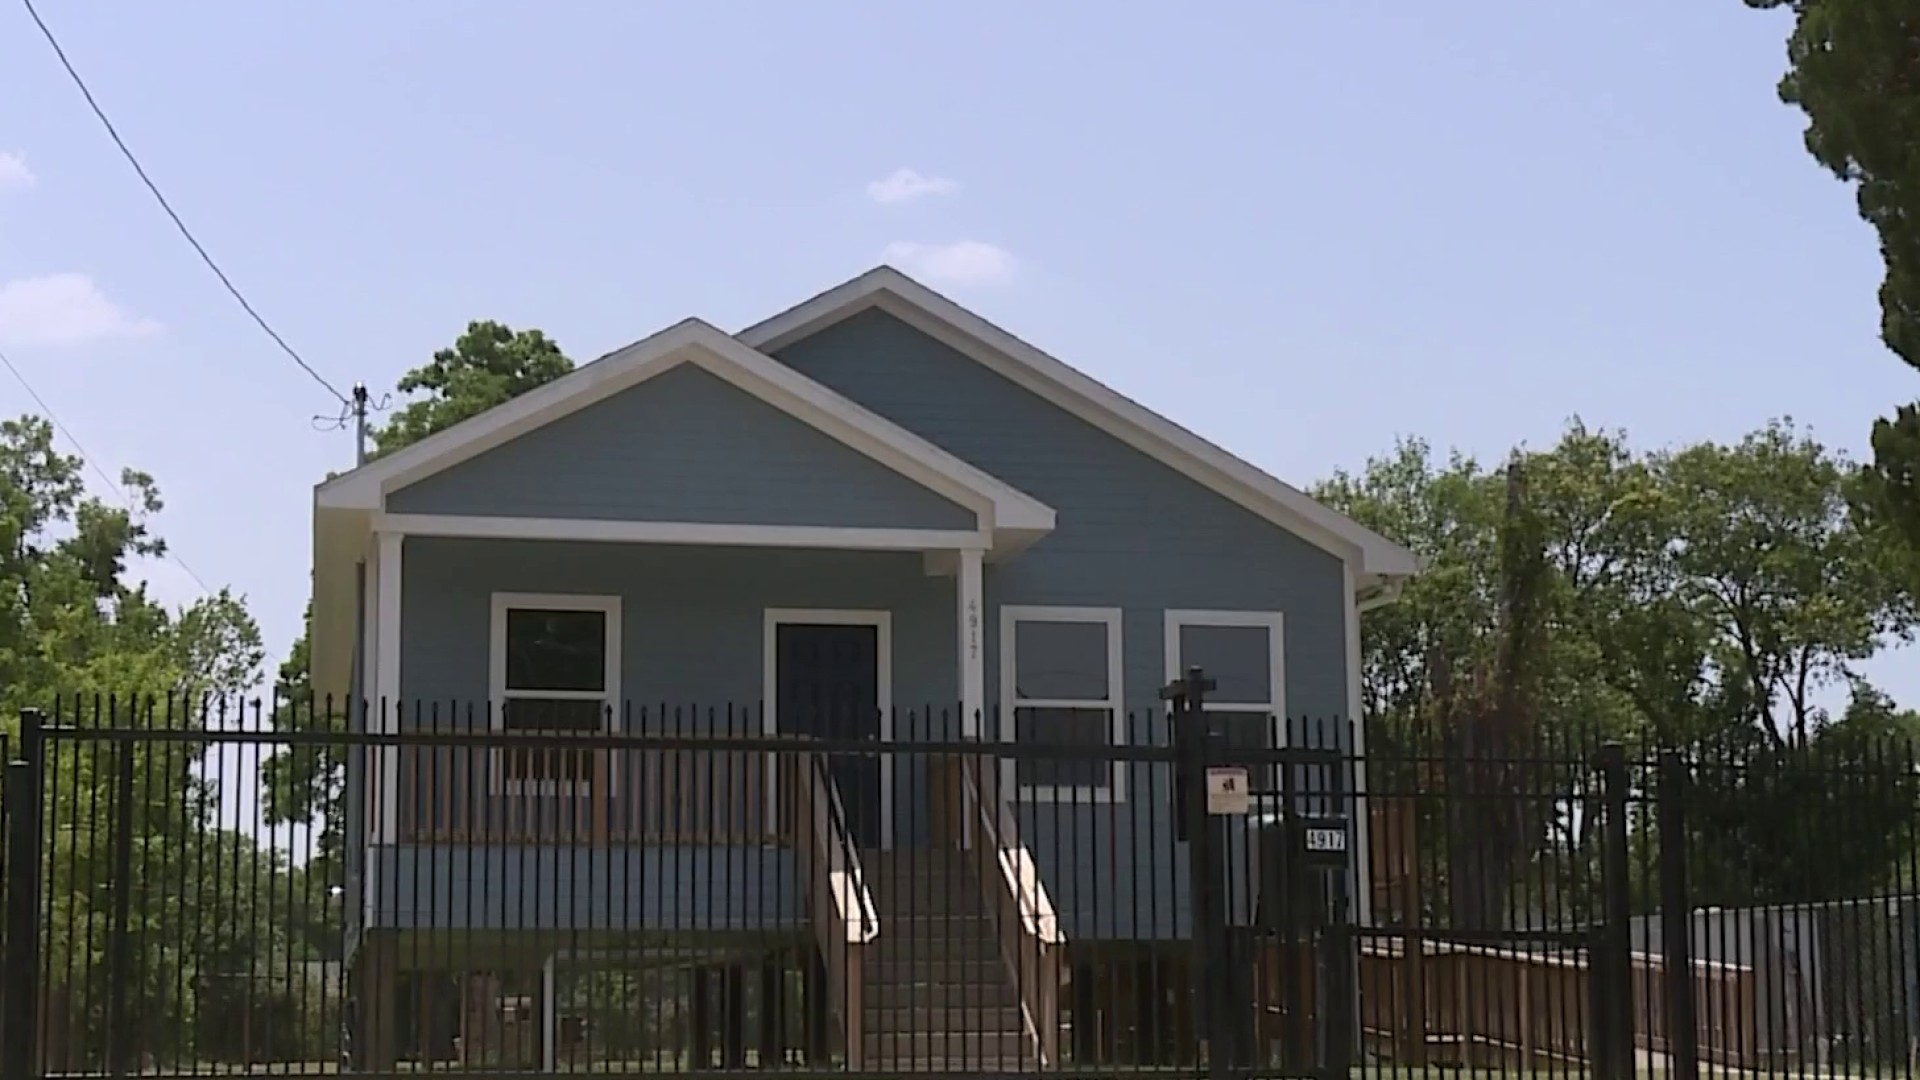 Nearly 5 years later, challenges persist for Houstonians trying to move  back home